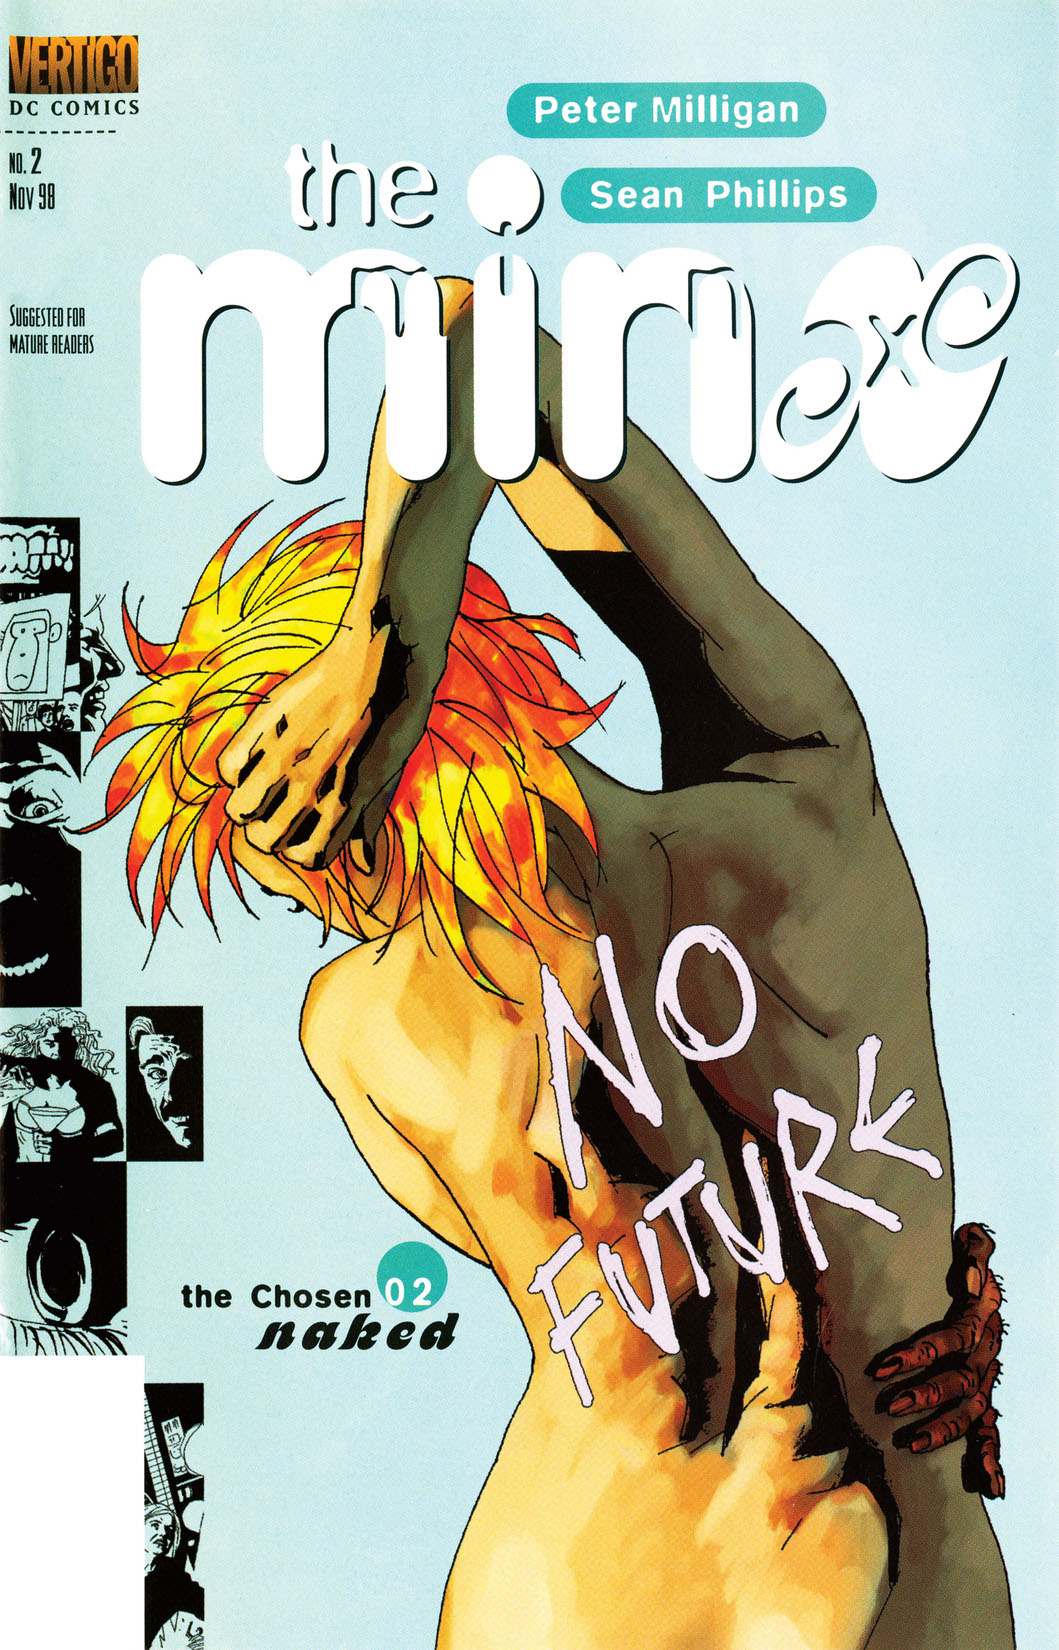 The Minx #2 preview images